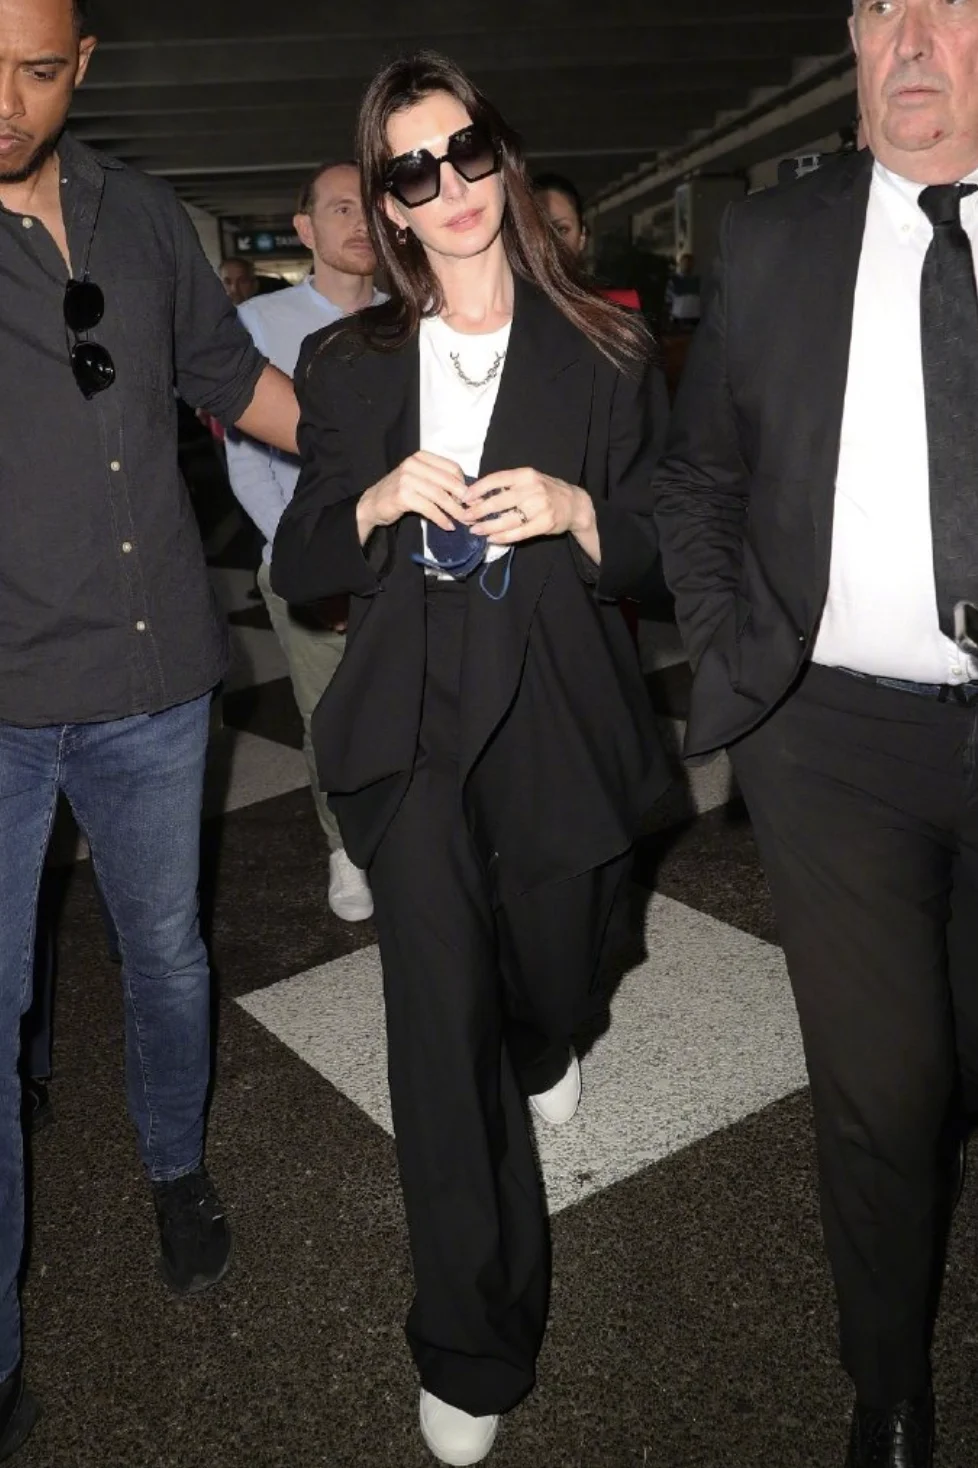 Anne Hathaway arrives at Nice airport for the Cannes Film Festival